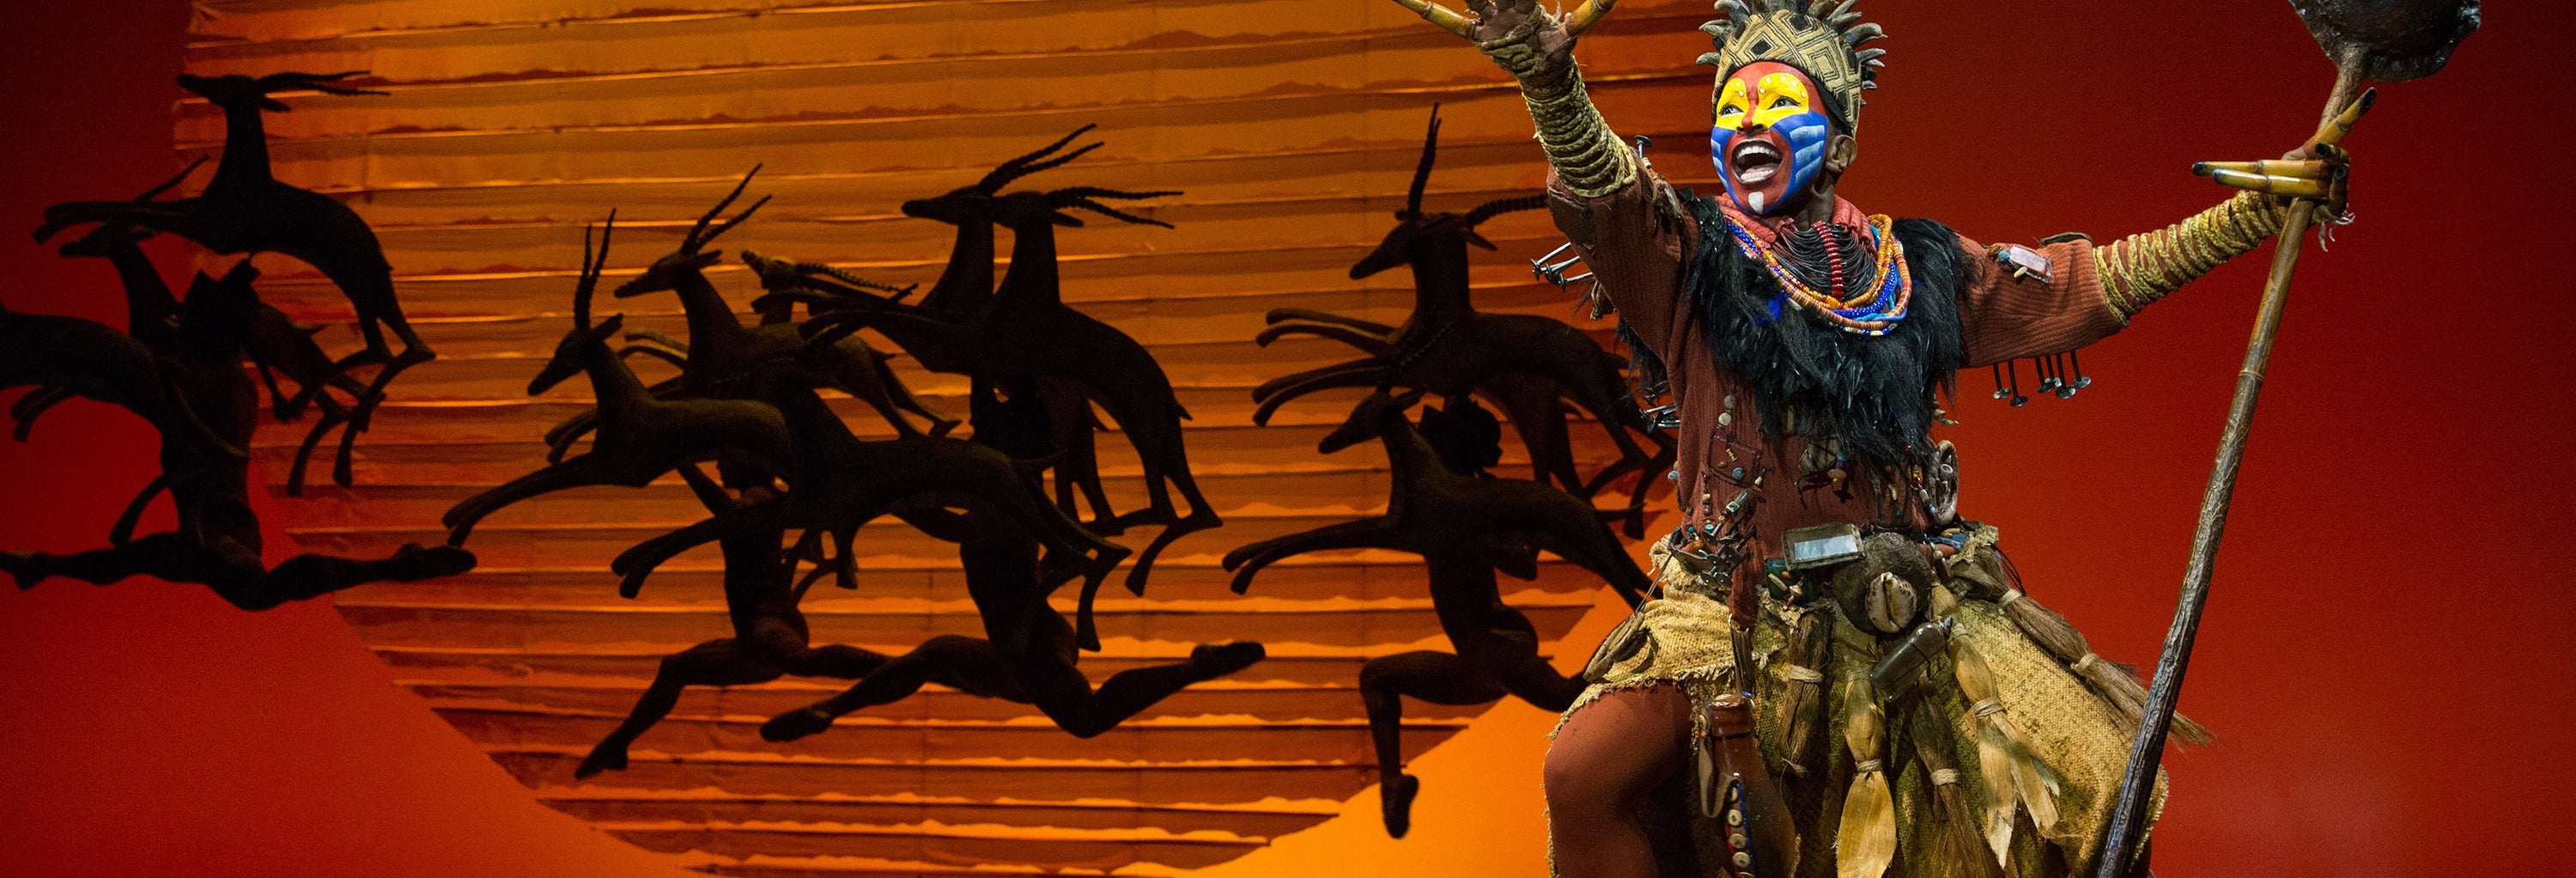 download the lion king broadway tickets